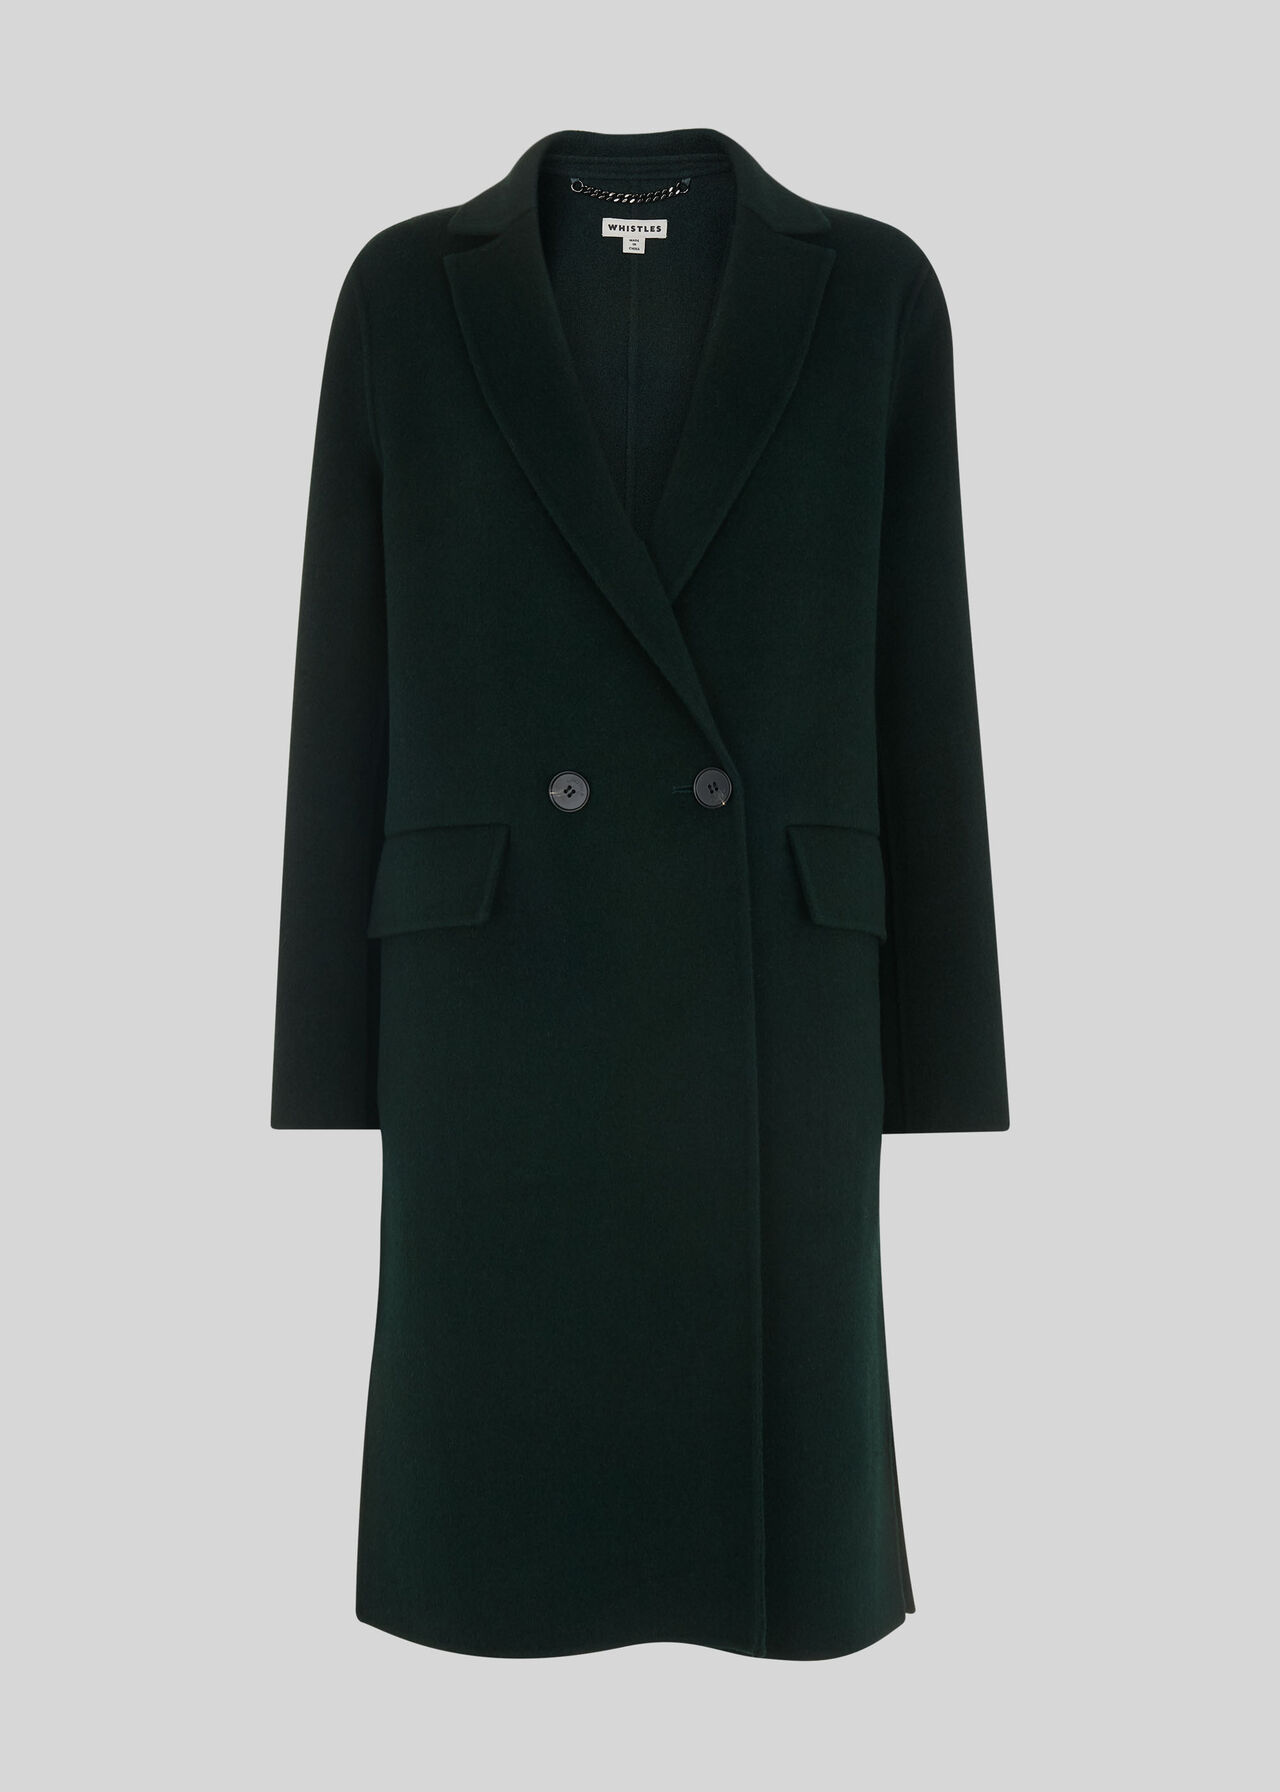 Dark Green Double Faced Wool Coat | WHISTLES